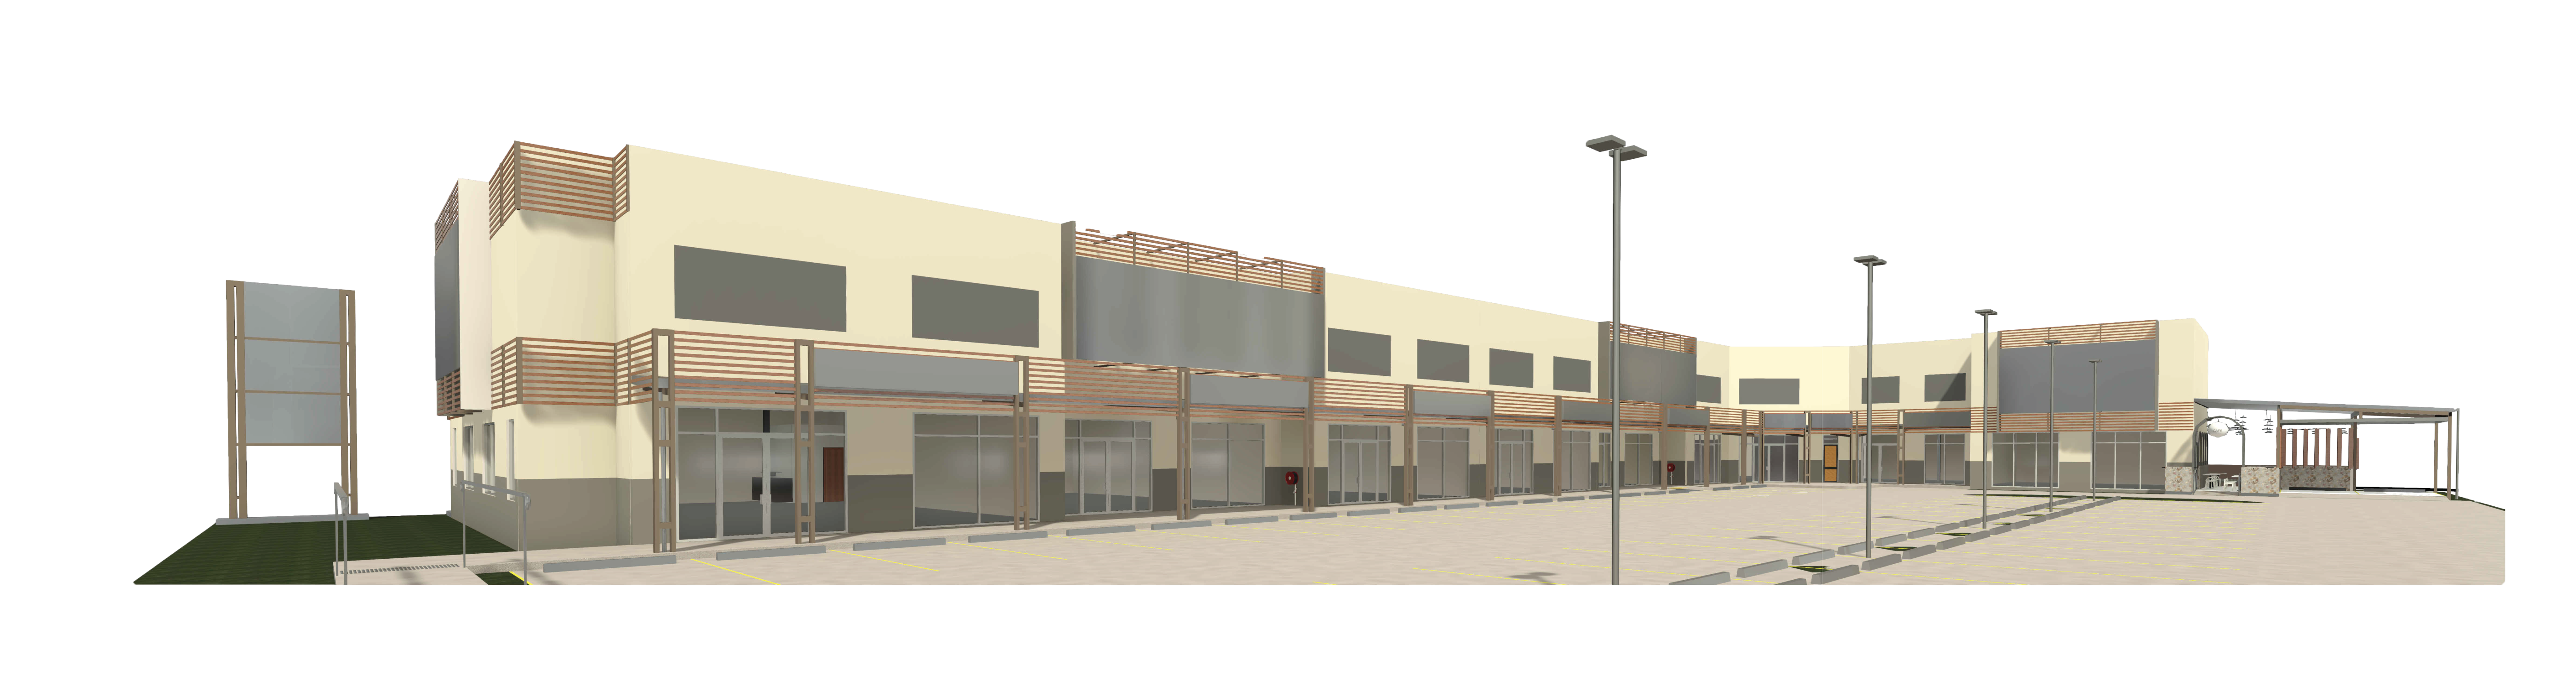 1930 1 CARLO DRIVE - REALISTIC 3D 1 cropped1